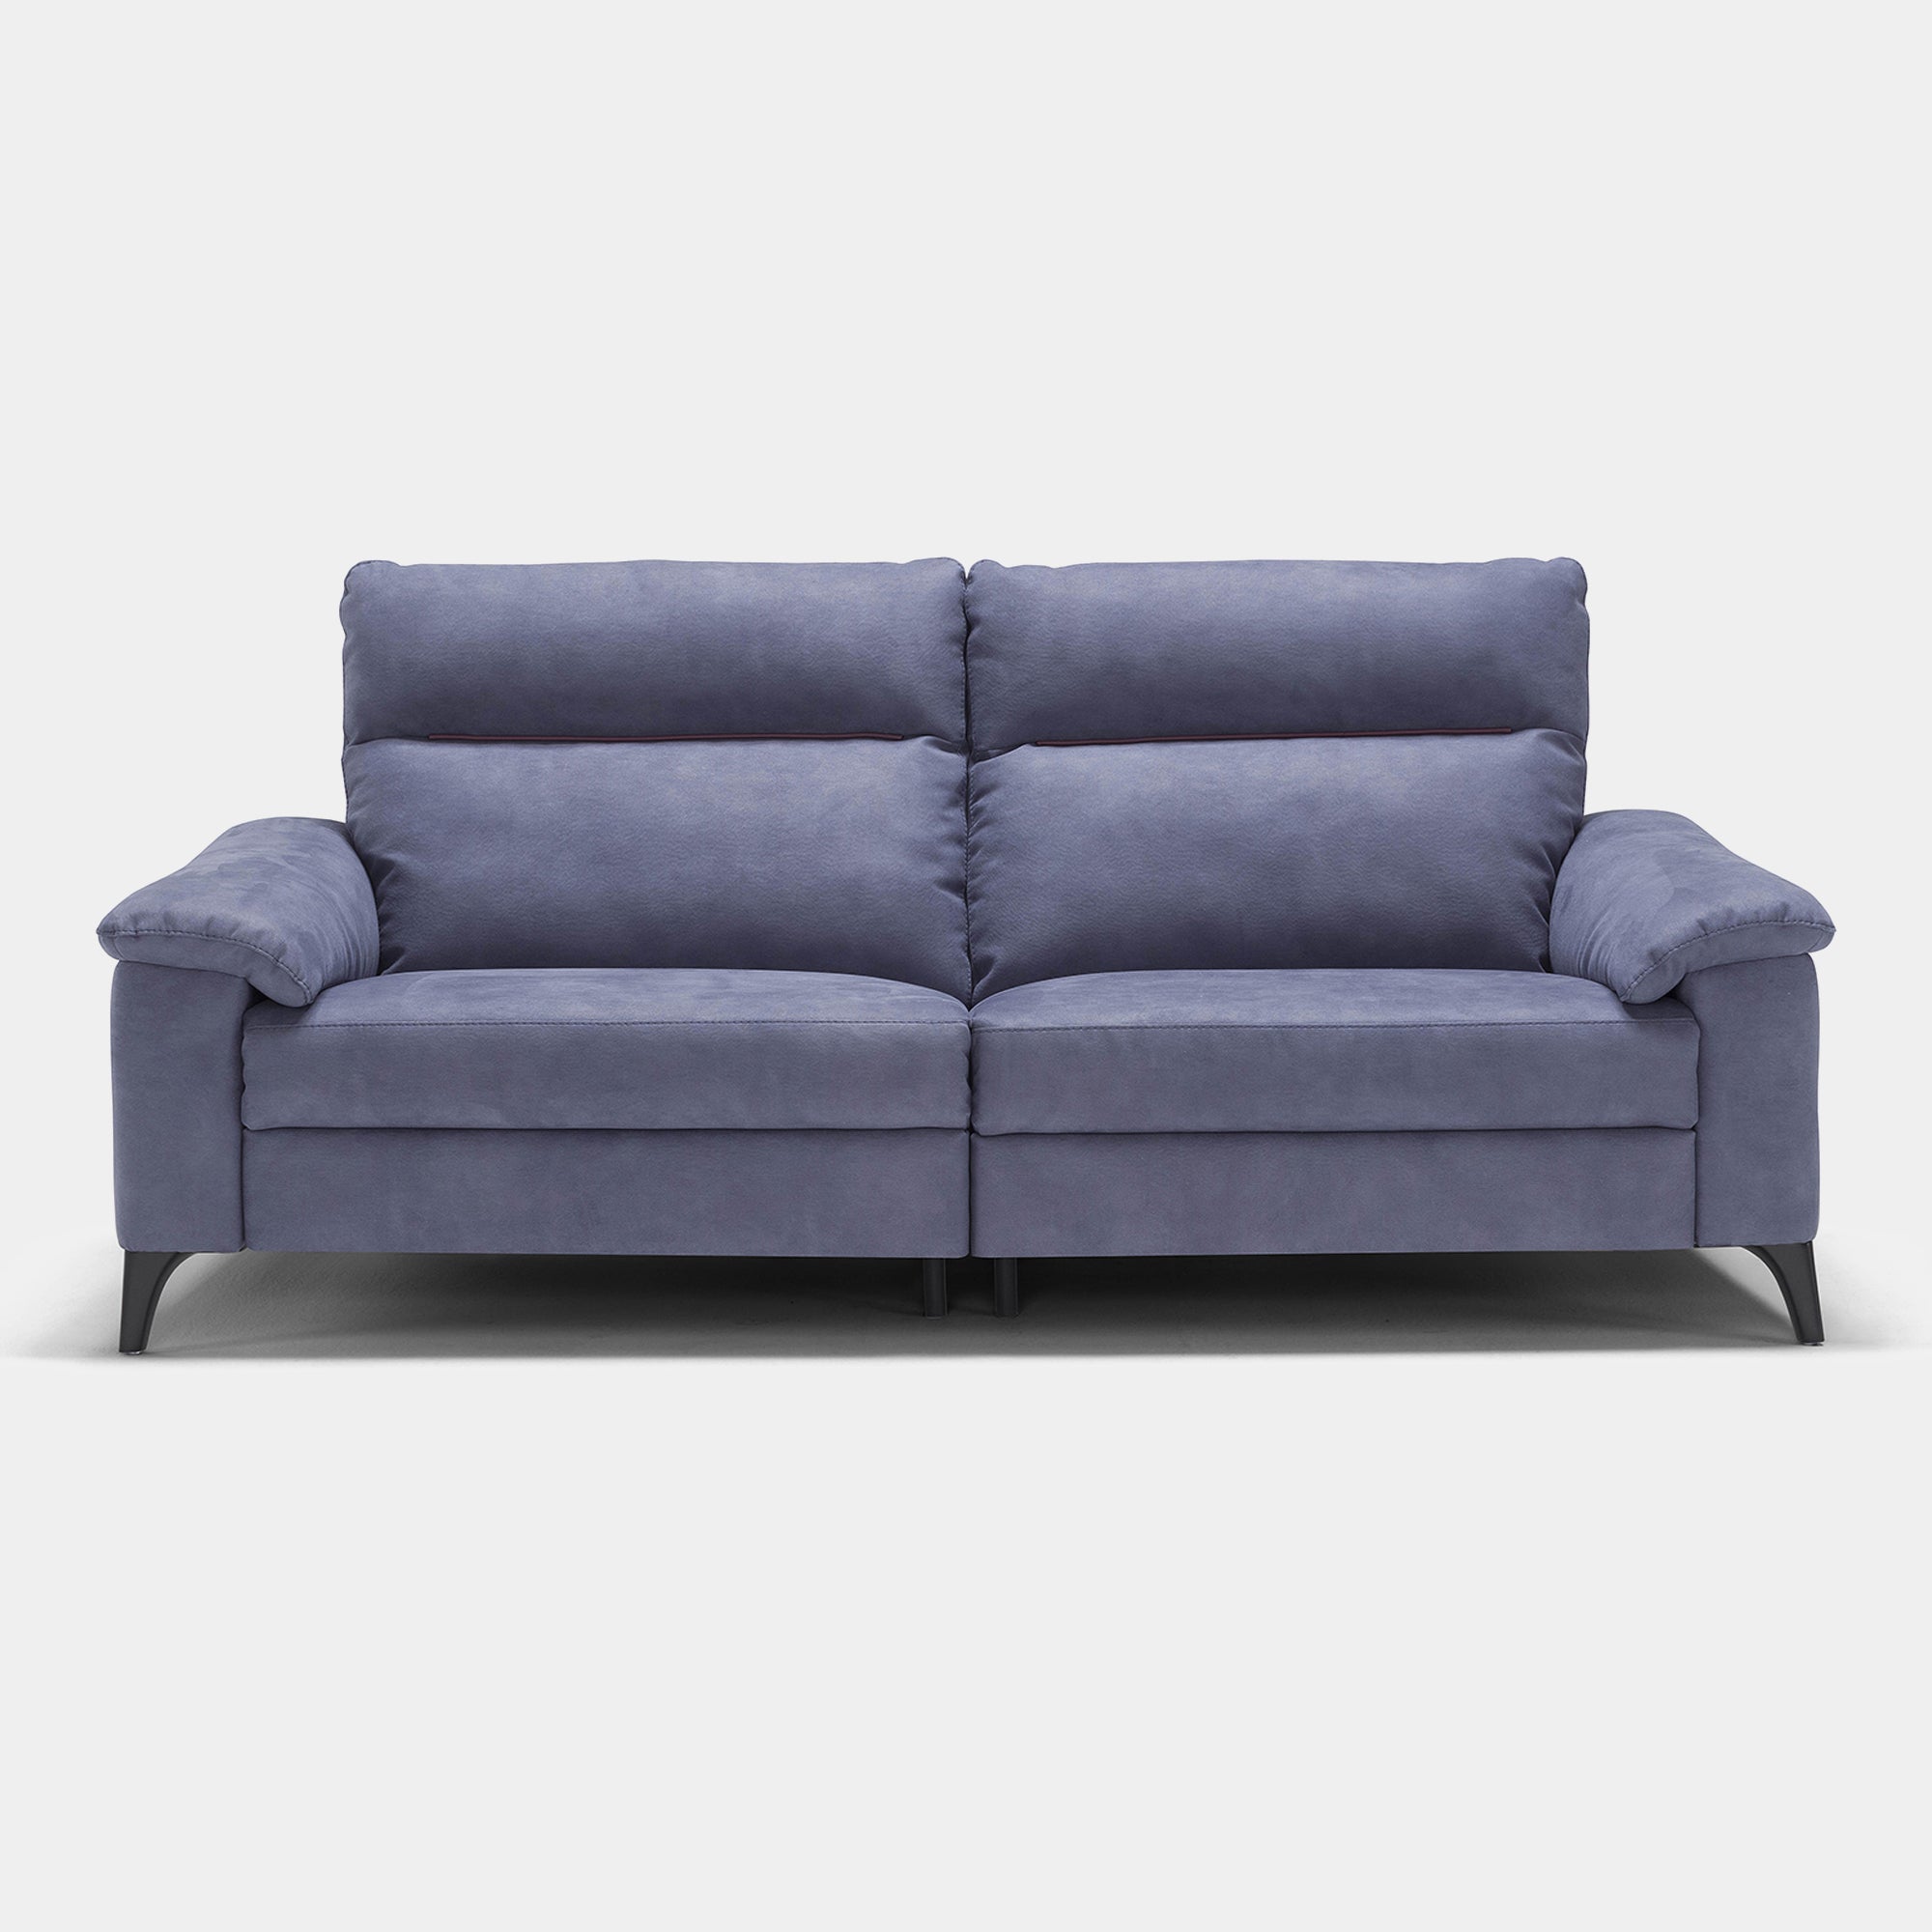 Treviso - 3 Seat Sofa In Fabric Or Leather Microfibre